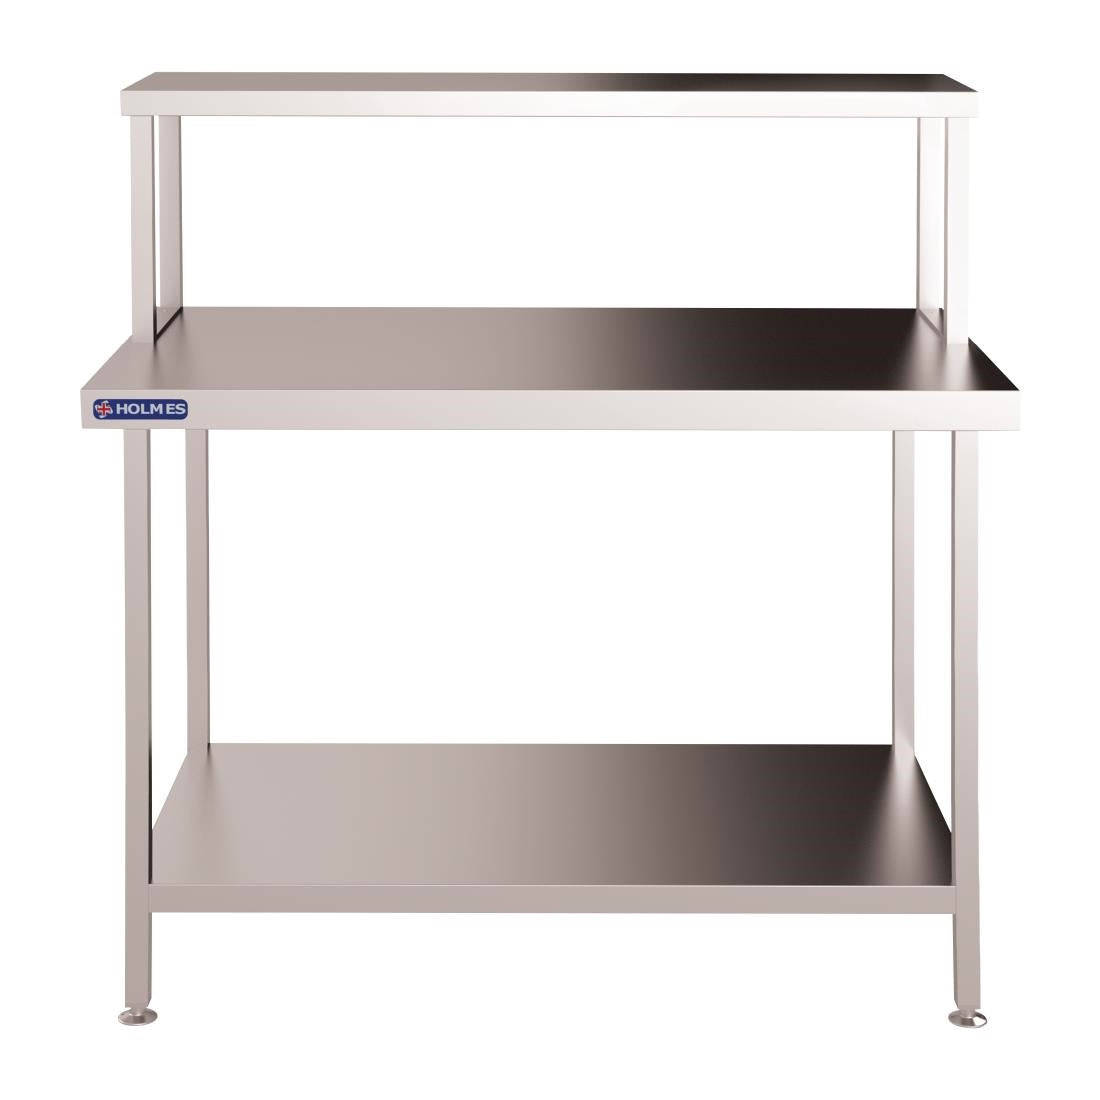 FC449 Holmes Stainless Steel Wall Work Table Welded with Gantry 1200mm JD Catering Equipment Solutions Ltd